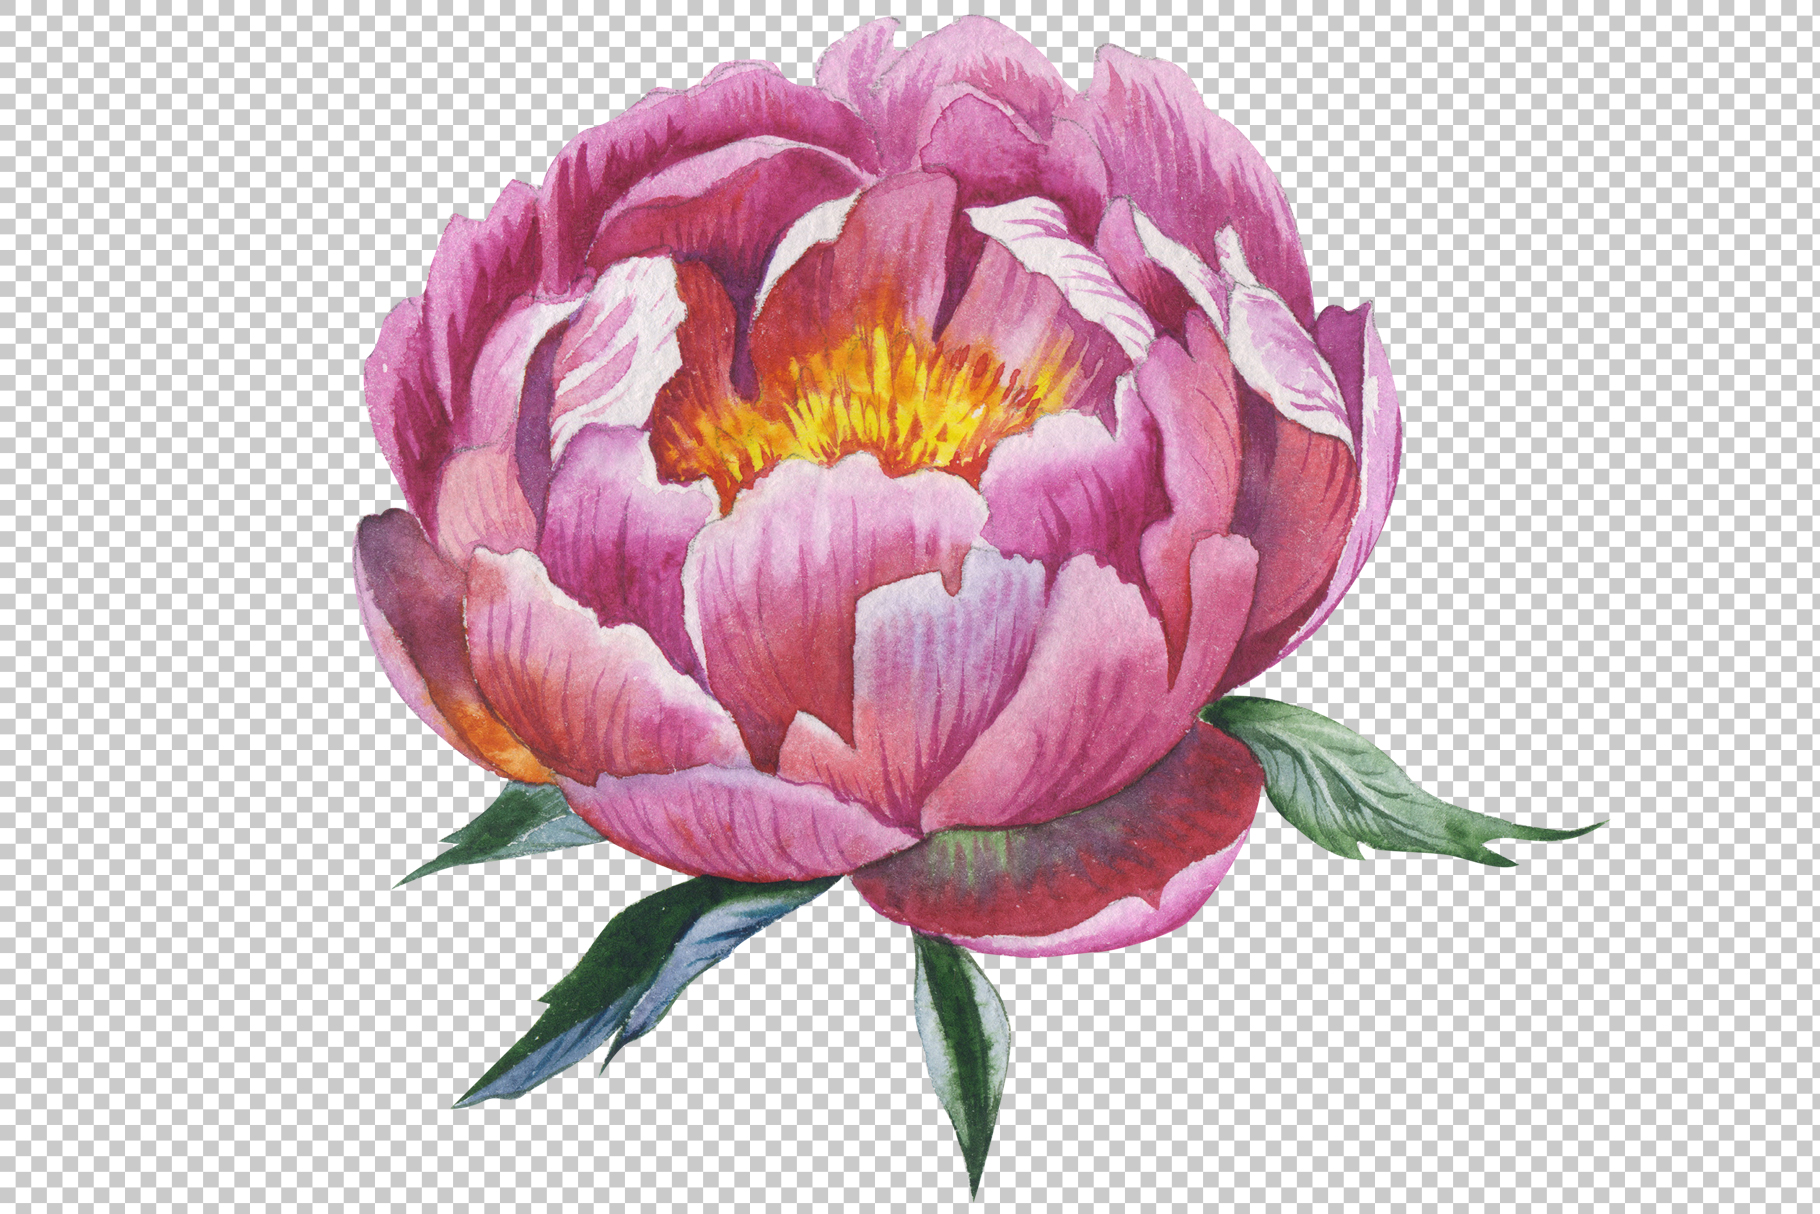 Red peony watercolor flower PNG (97885) | Illustrations | Design Bundles